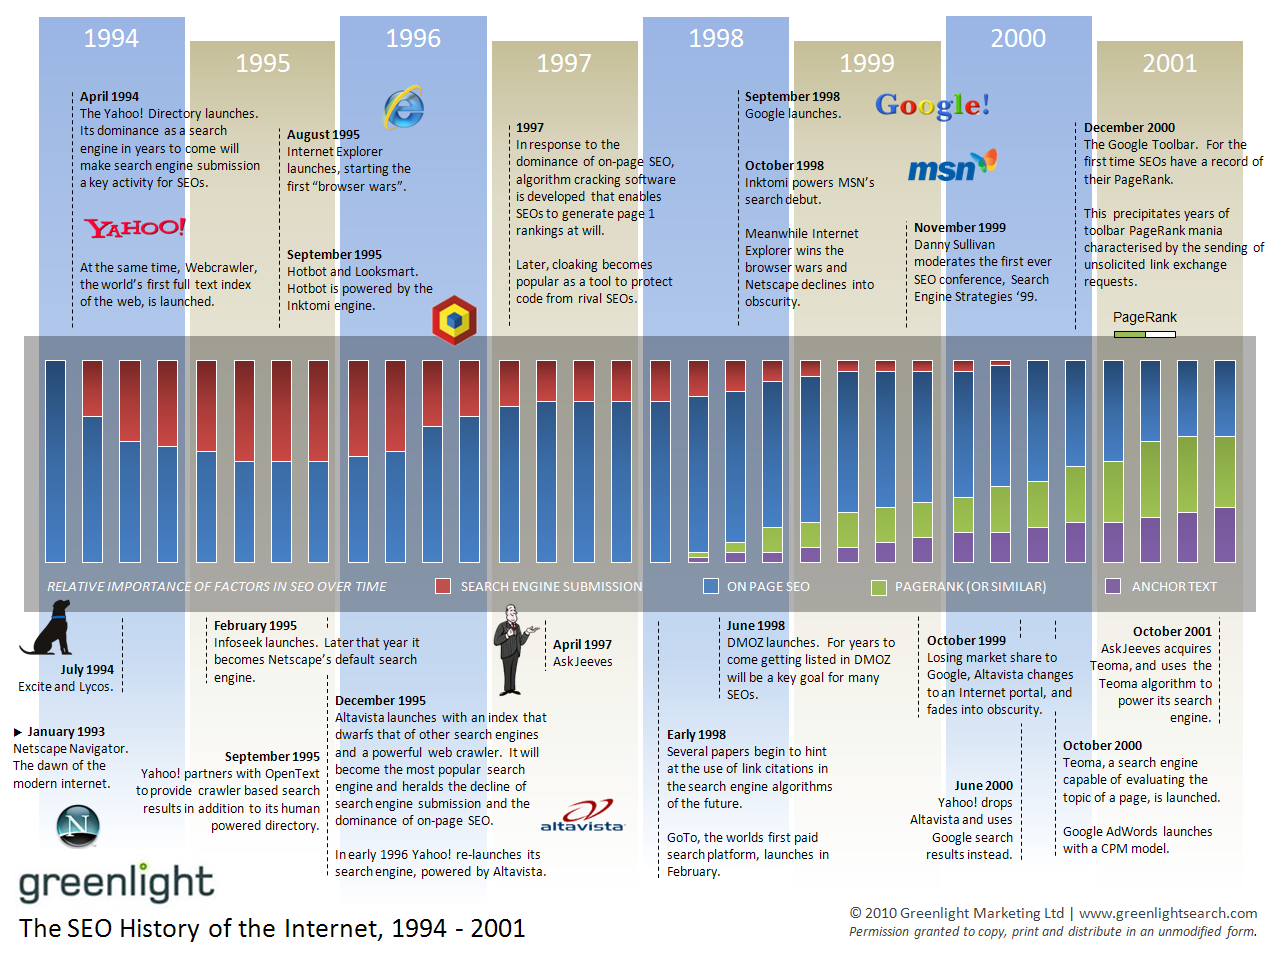 http://www.greenlightsearch.com/assets/images/history/greenlight-history-of-seo-1994-2001.png